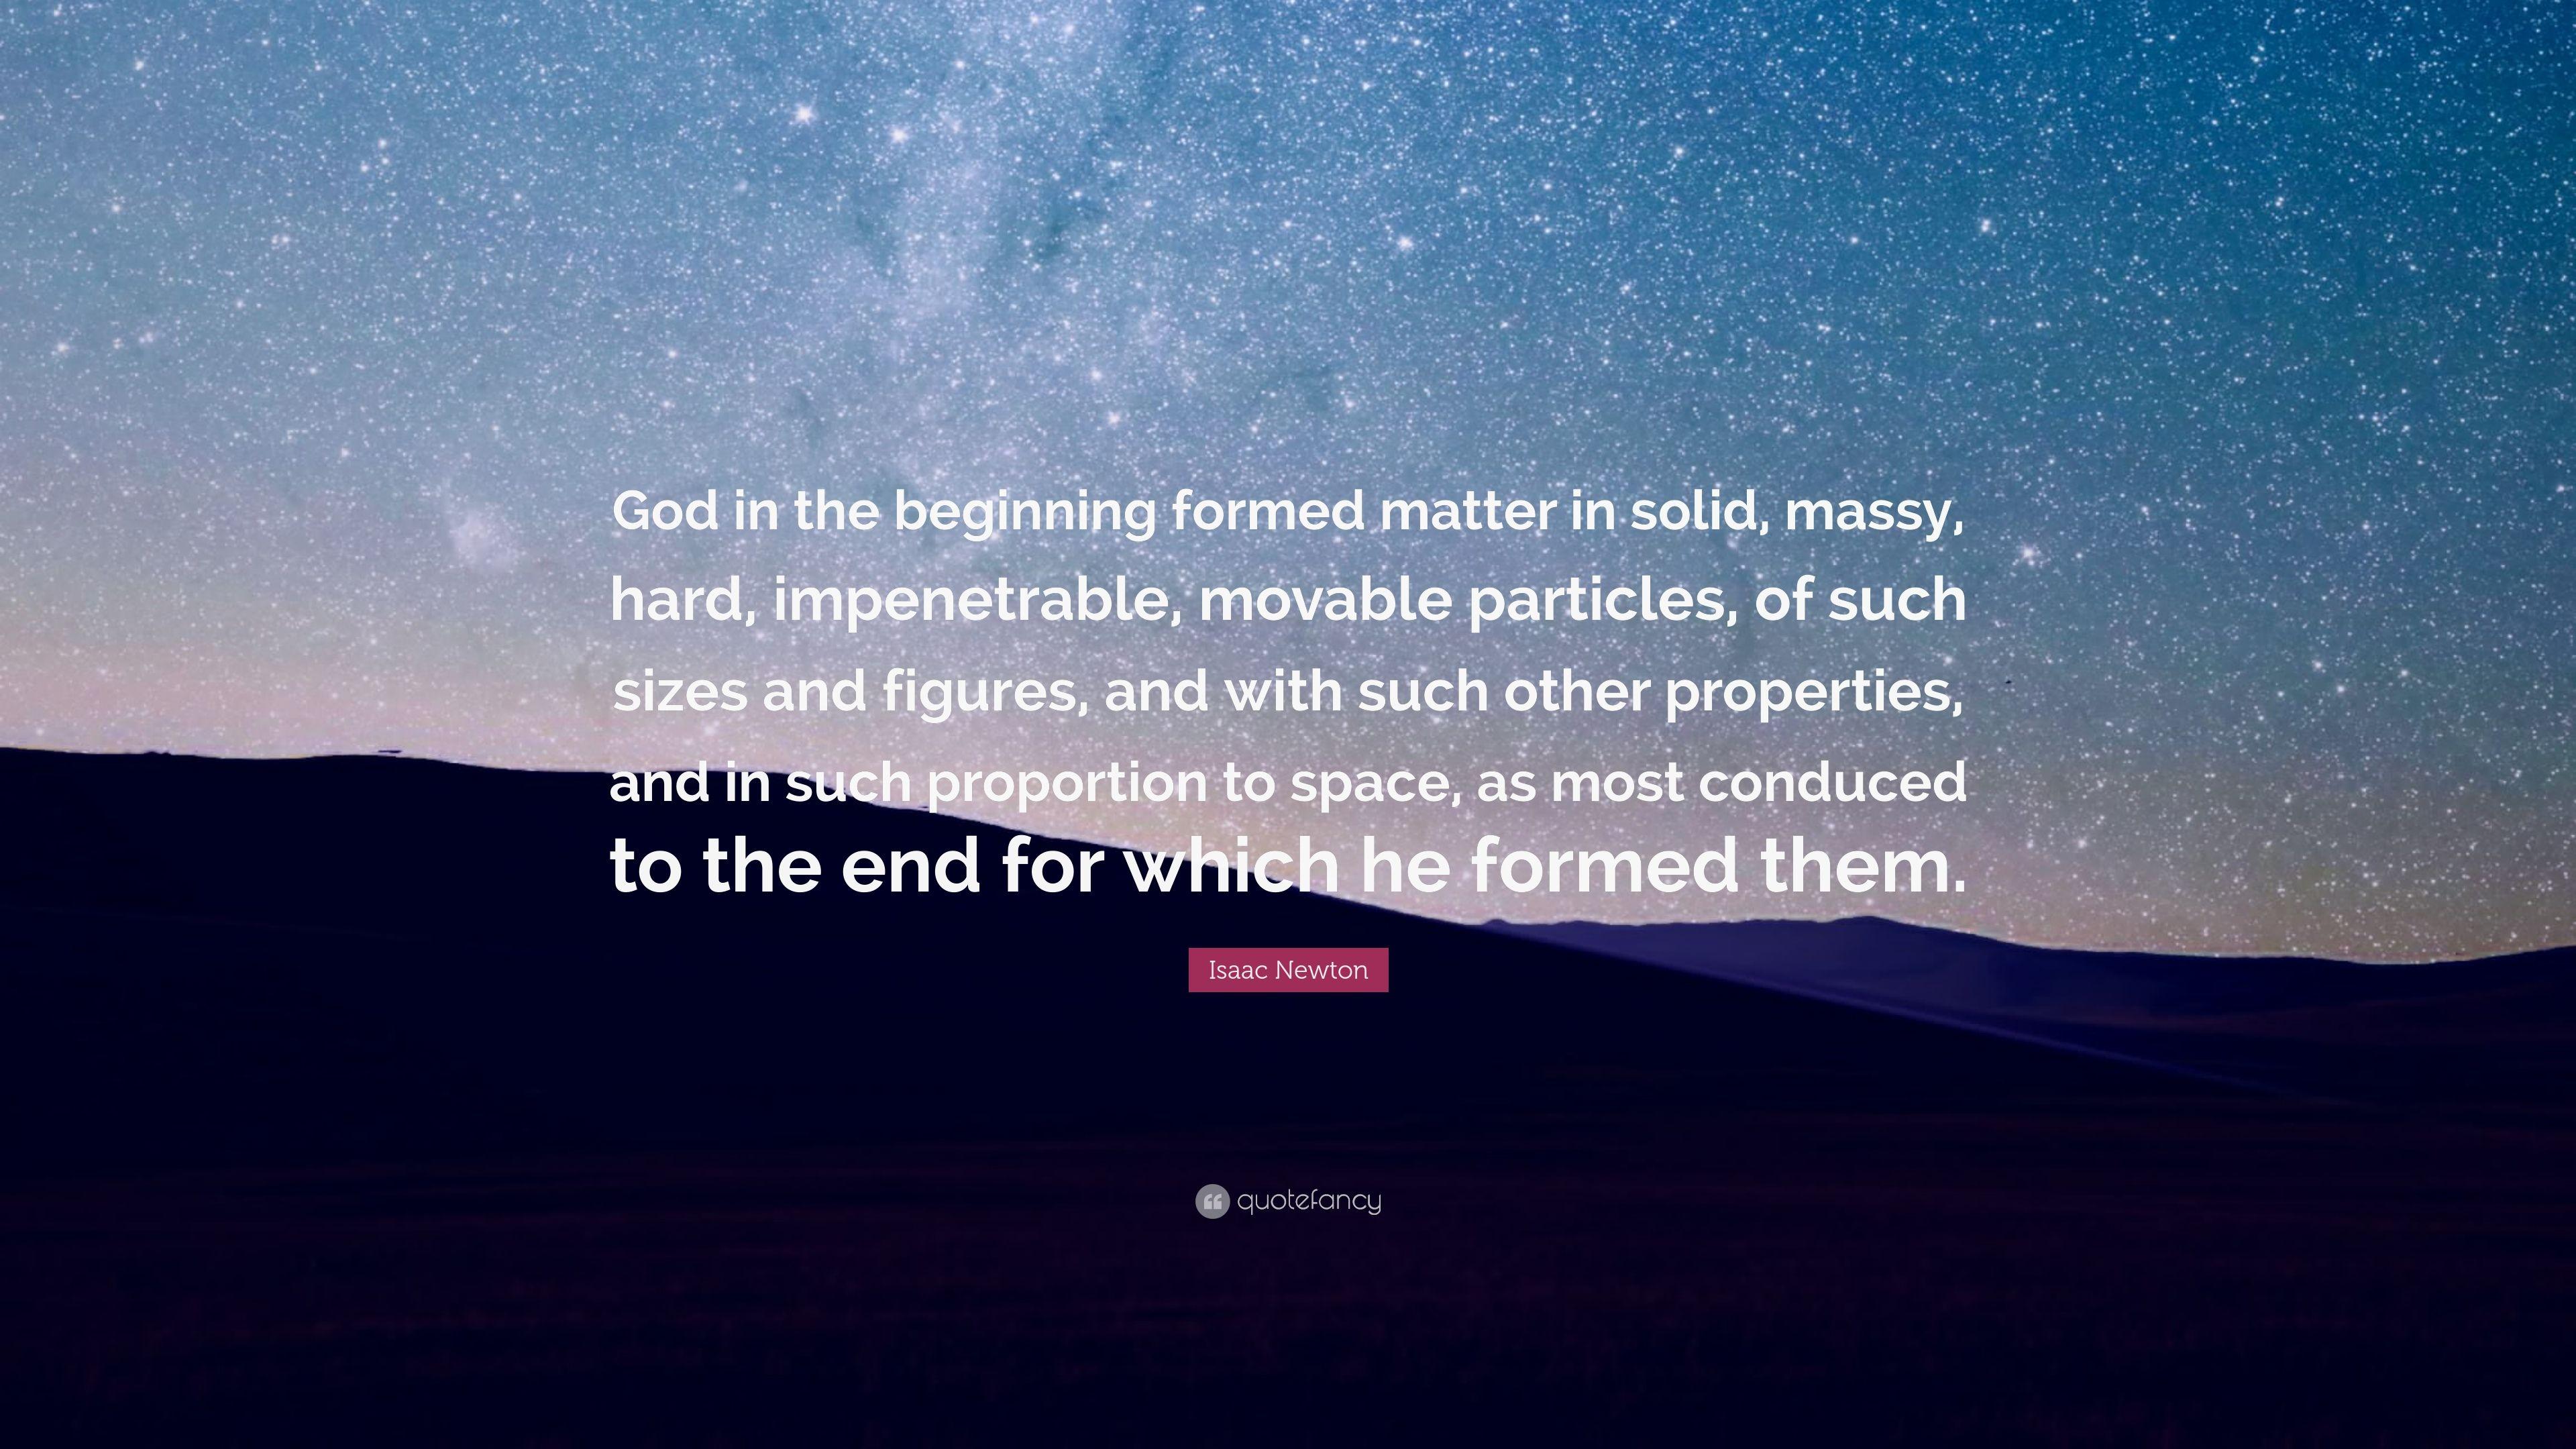 Isaac Newton Quote: “God in the beginning formed matter in solid